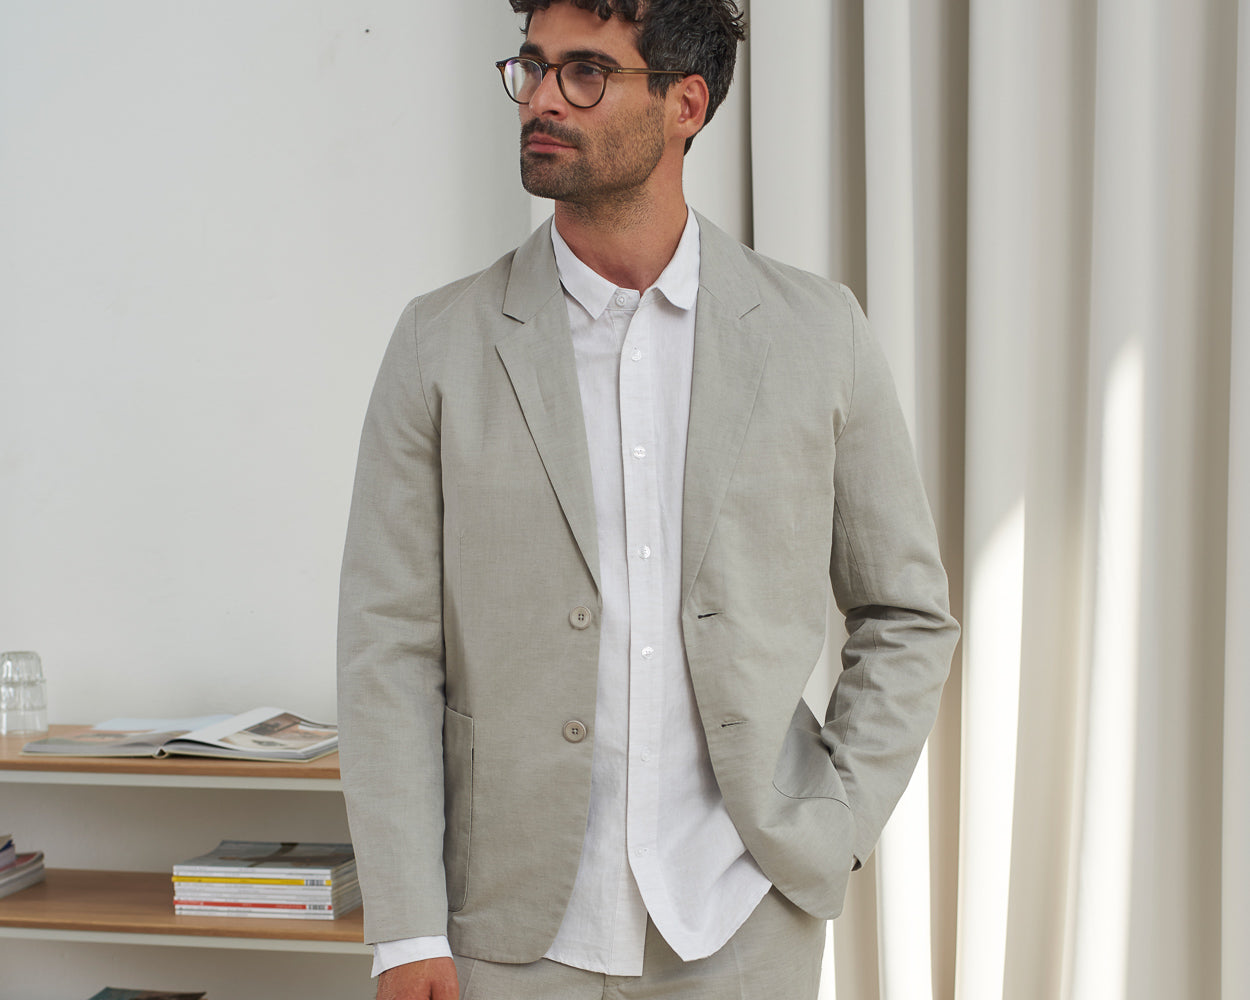 Relaxed light summer suit made from natural linen